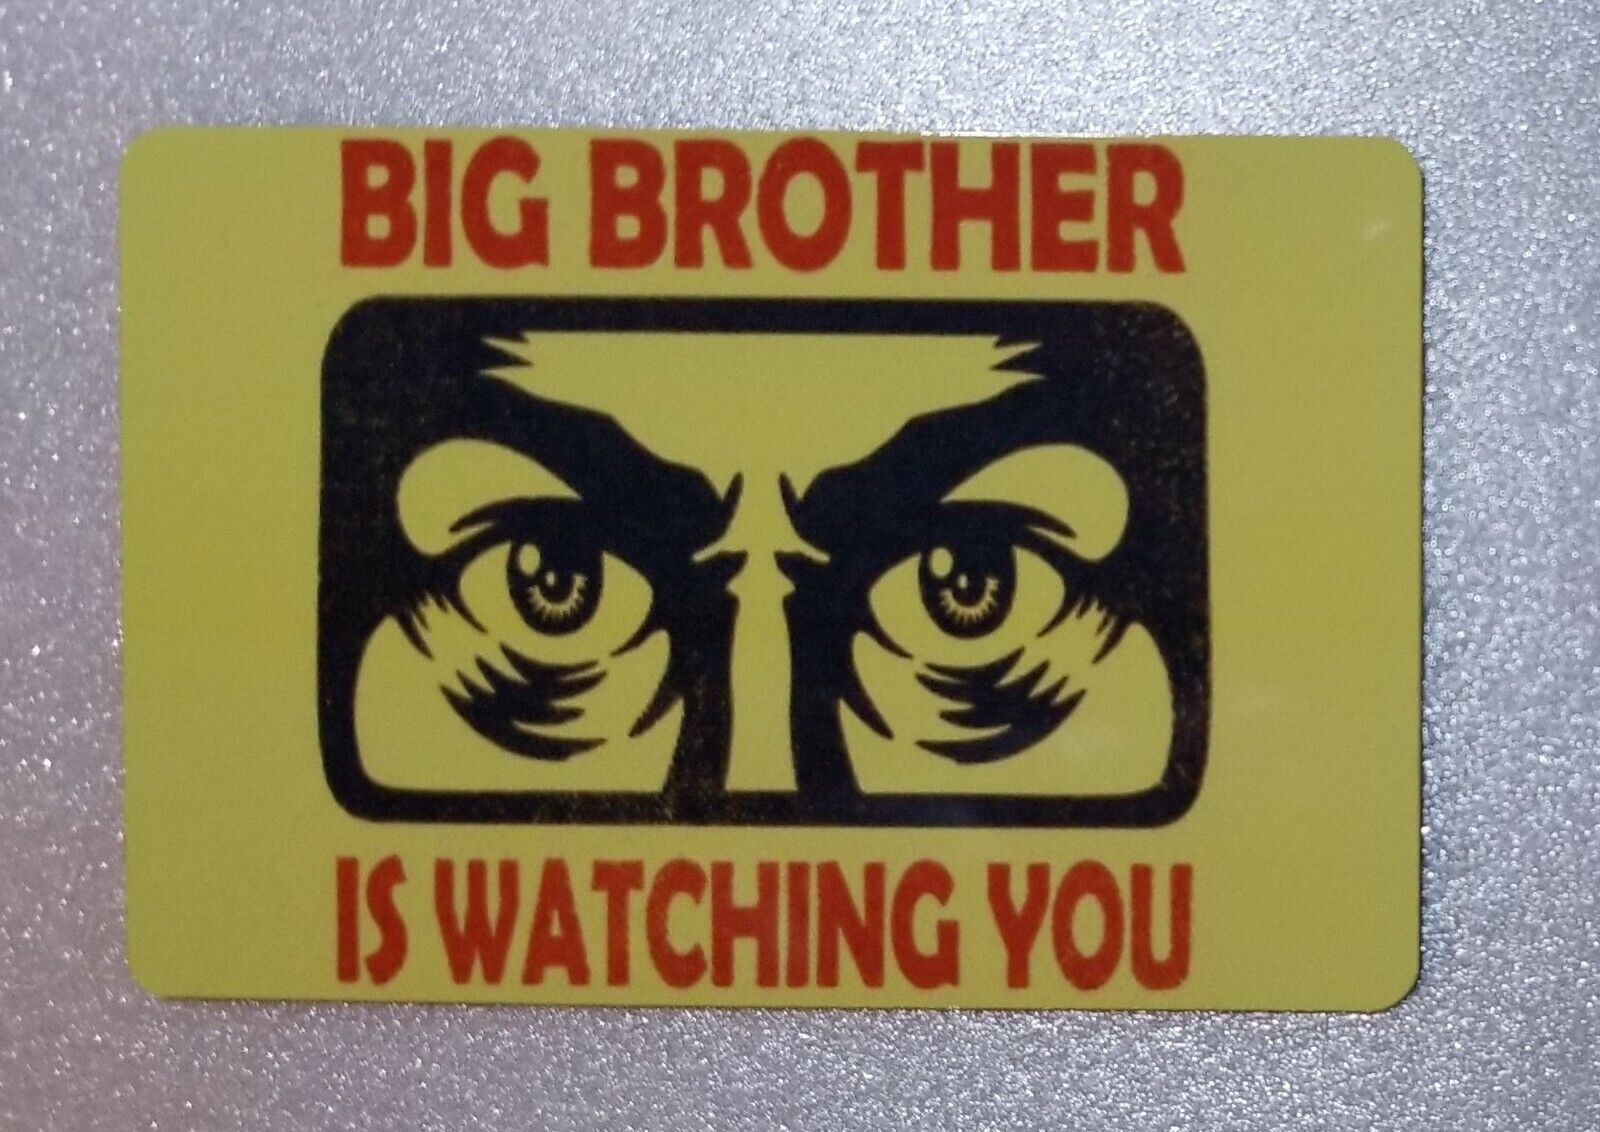 1984 Big Brother Is Watching You #1 George Orwell 2x3 refrigerator fridge magnet